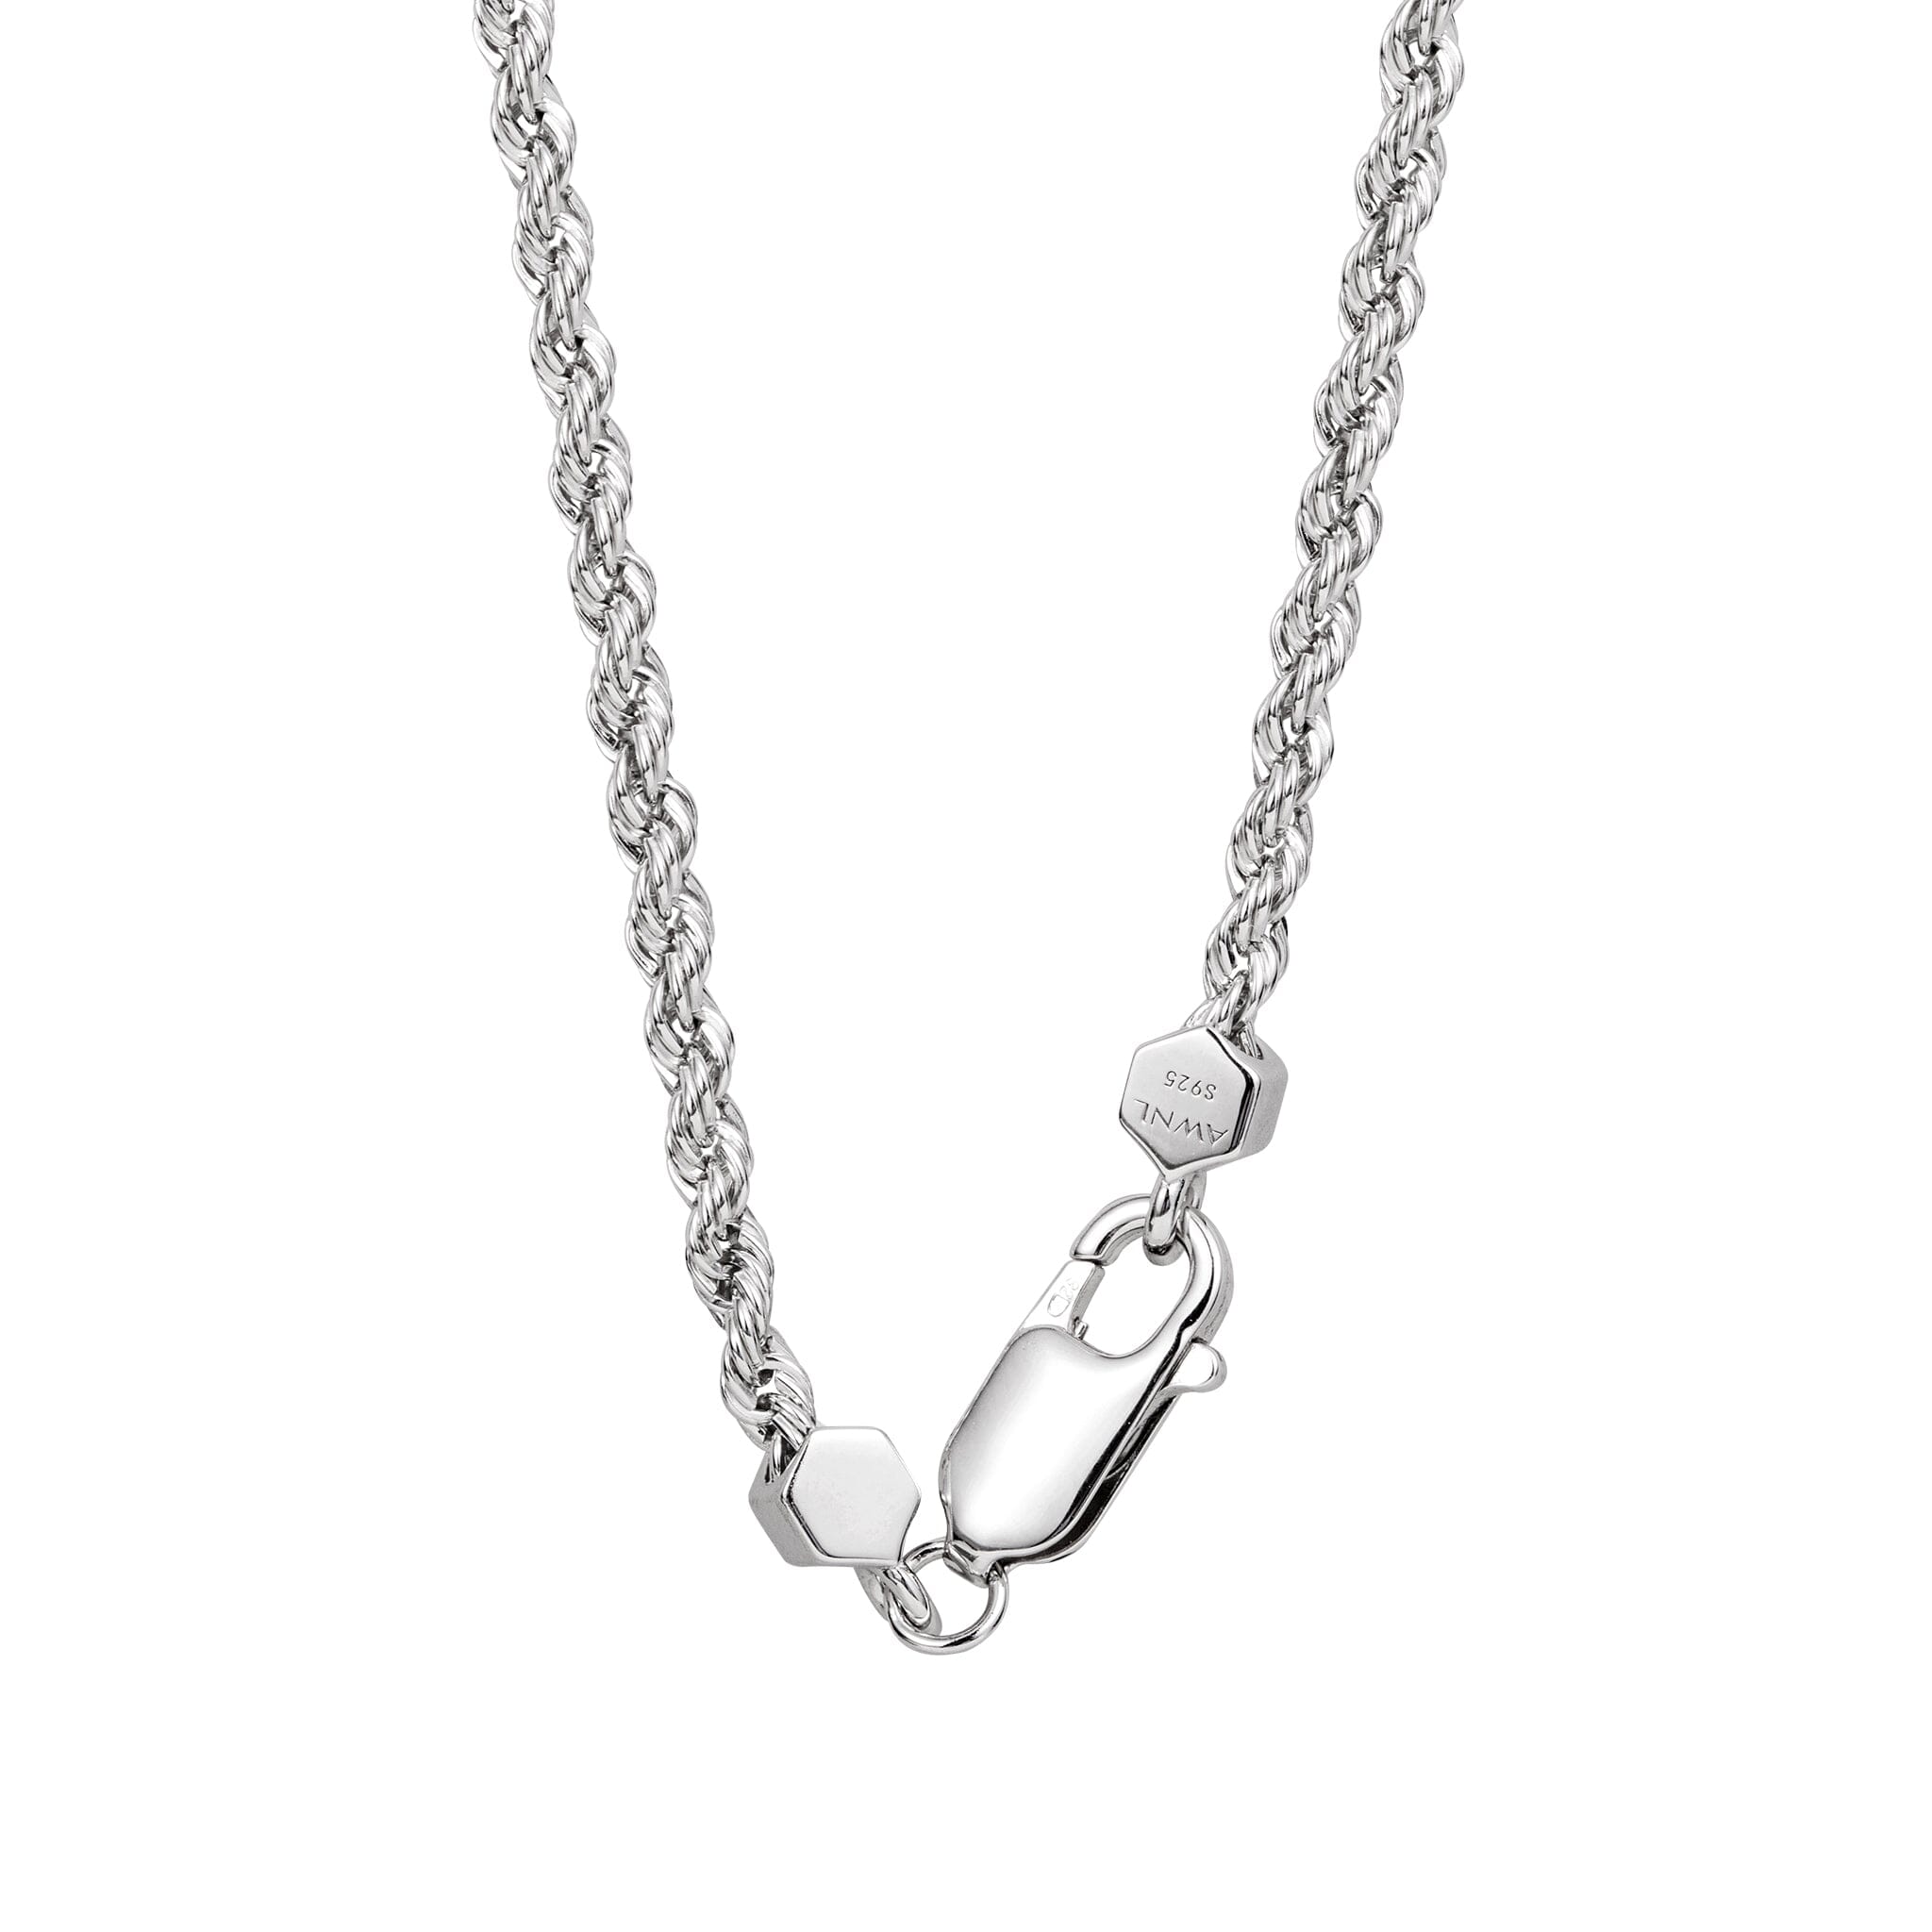 Men's Sterling Silver Nordic Rope Chain Chains WAA FASHION GROUP 